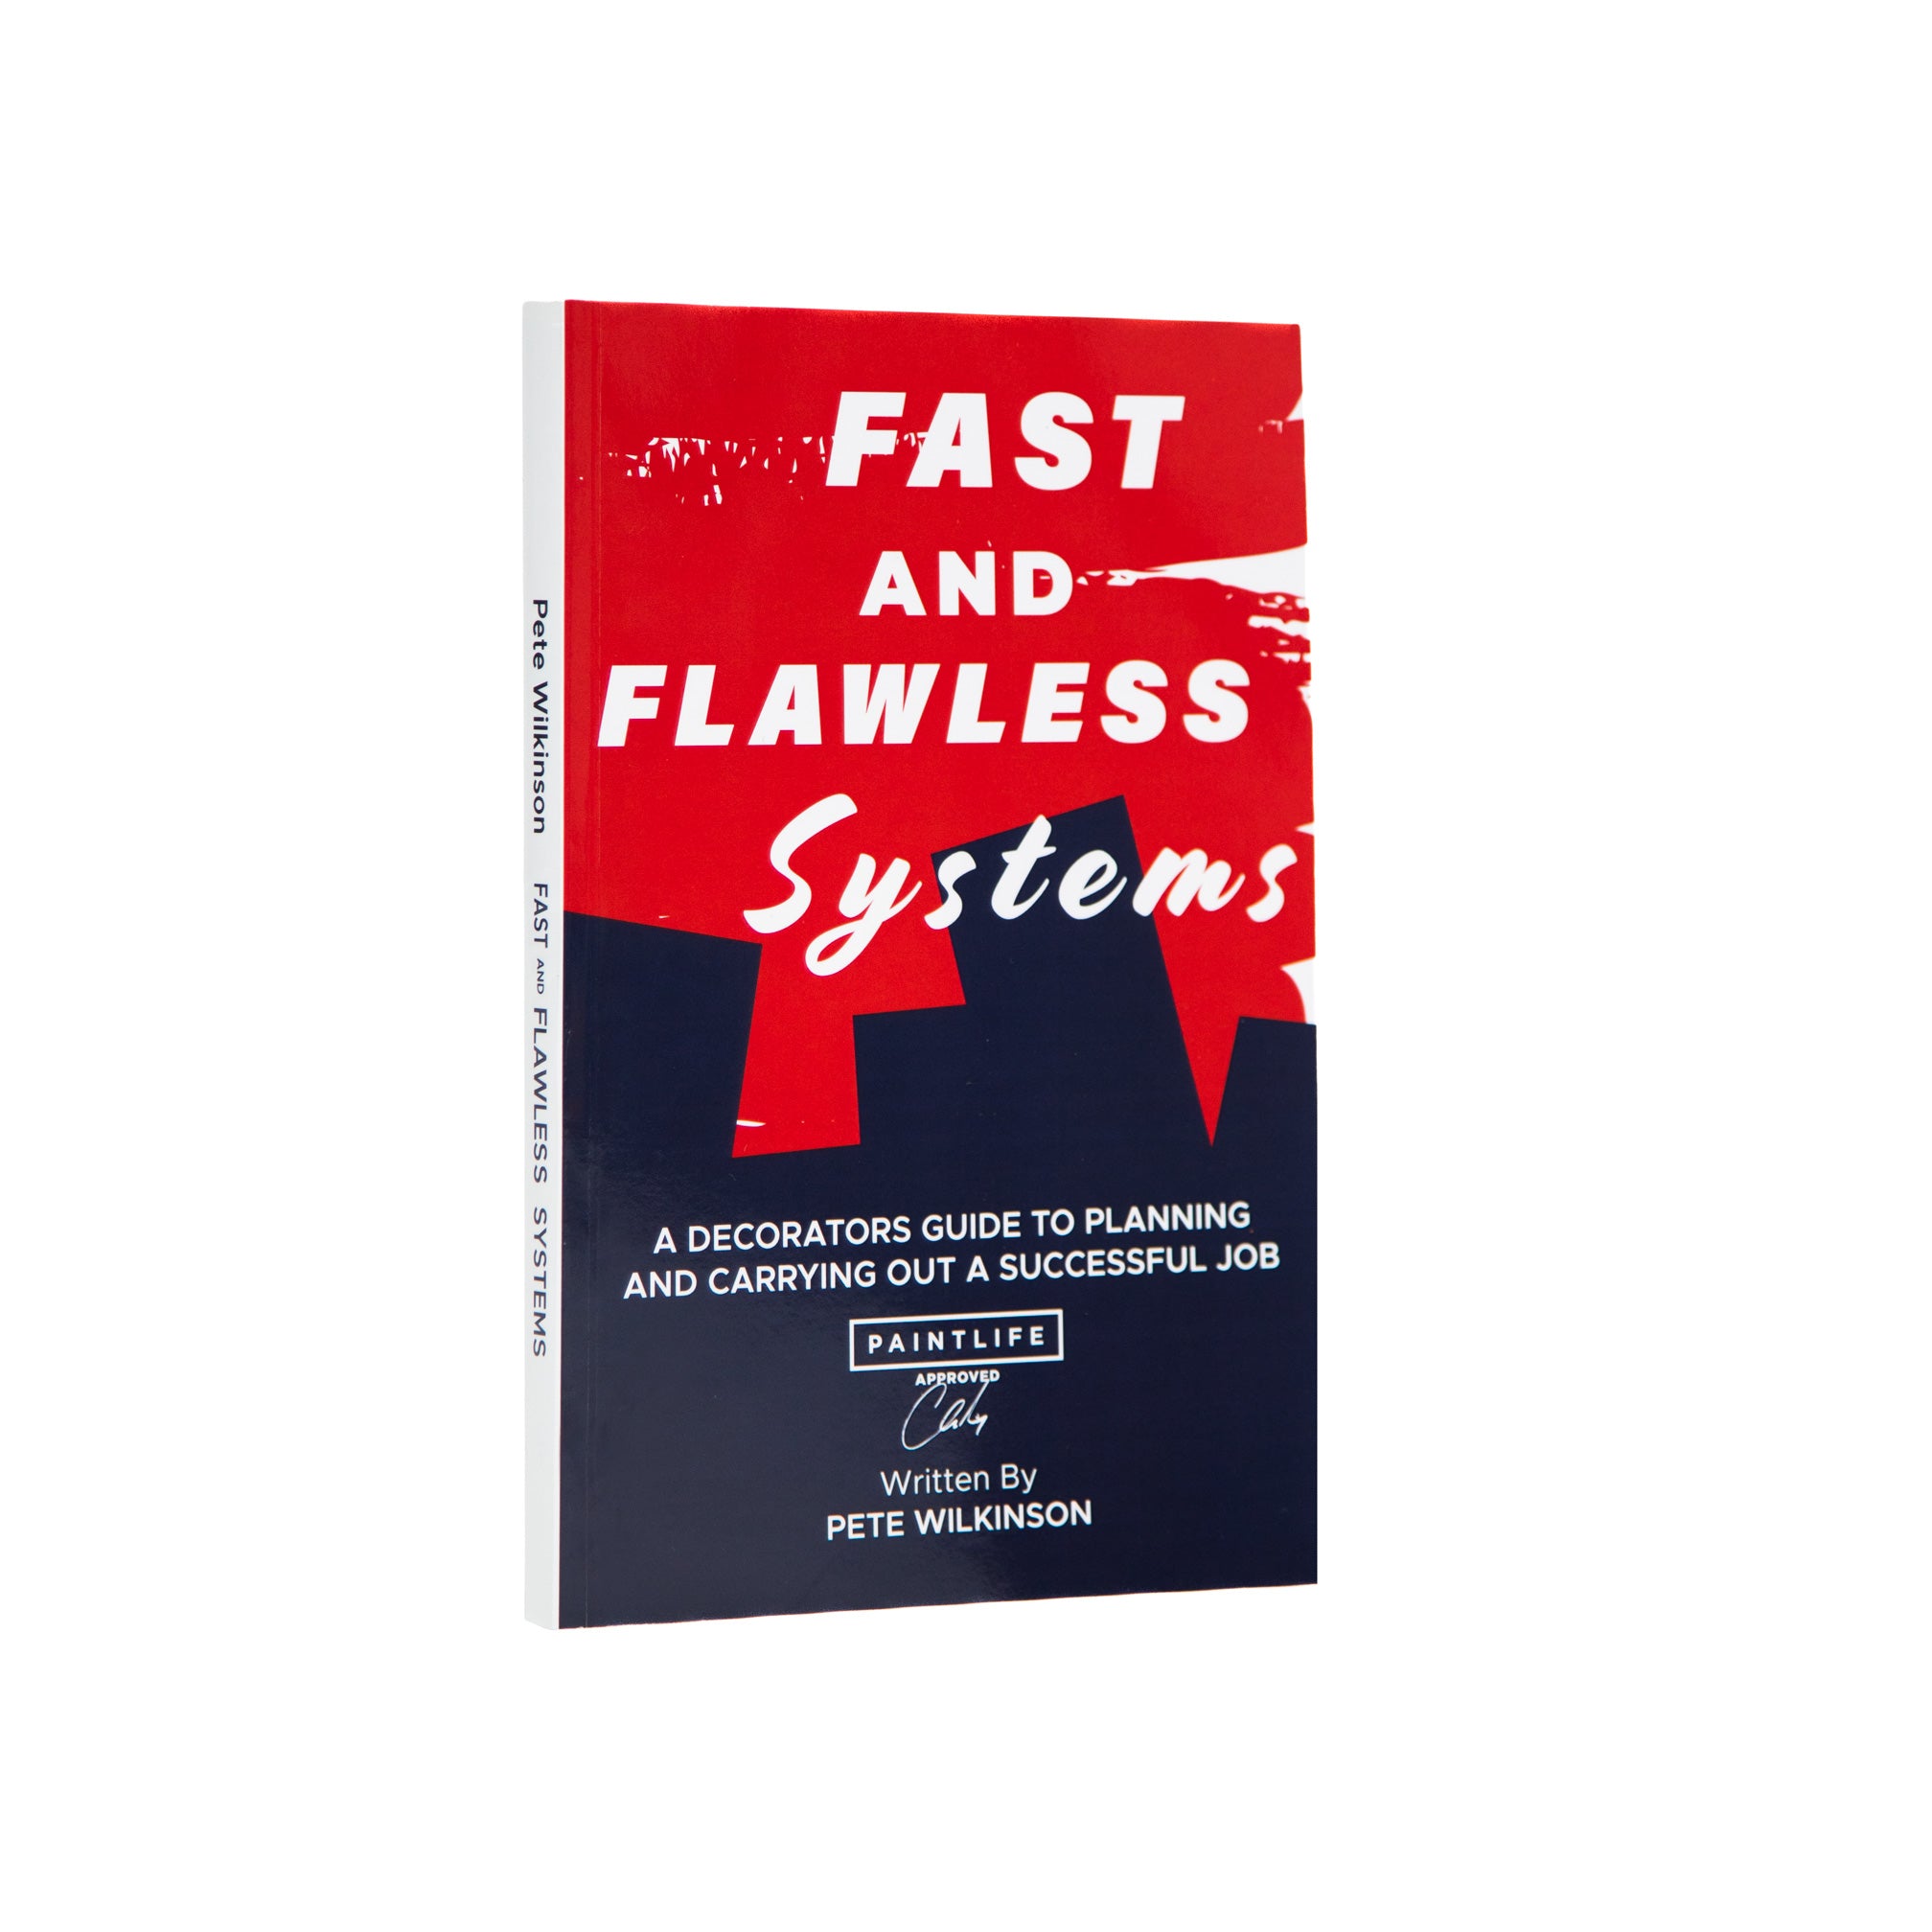 Flawless Systems Book